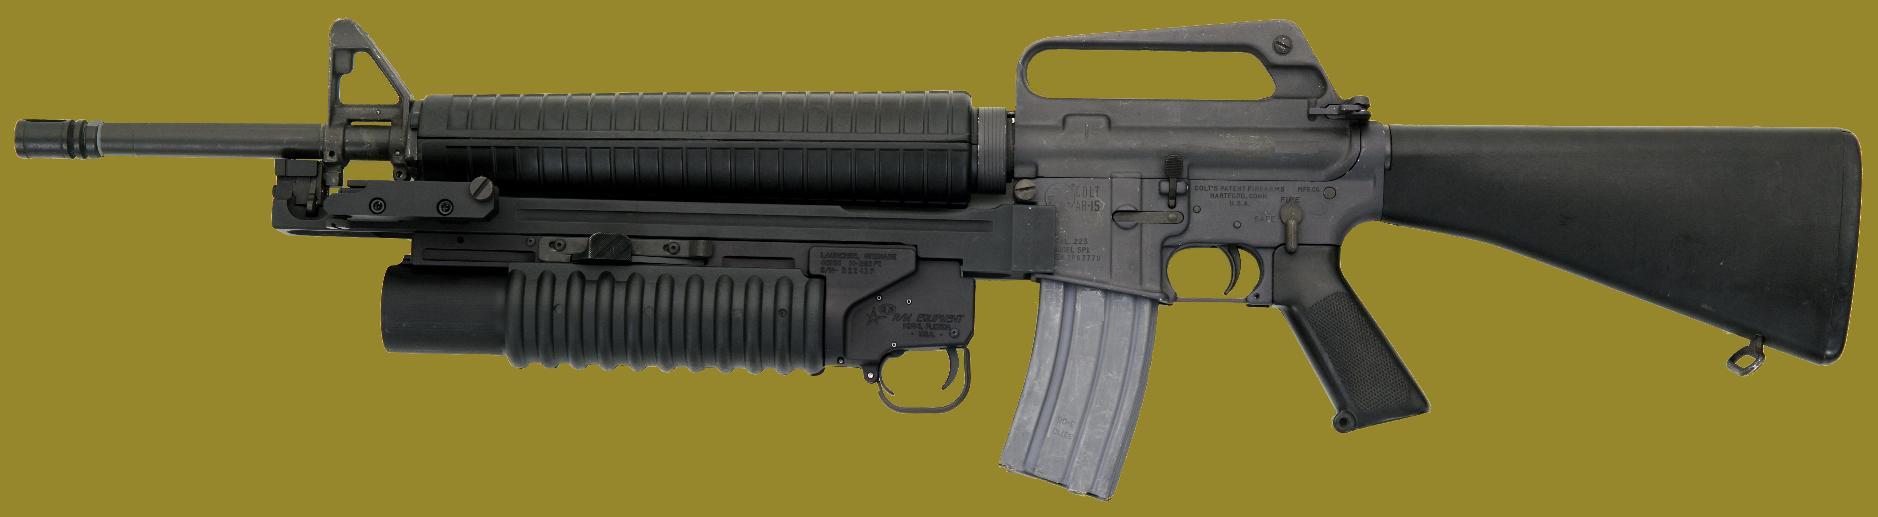 The M203 40mm grenade launcher on the M16 rifle - one version of the M203PI EGLM manufactured by RM Equipment, Inc.